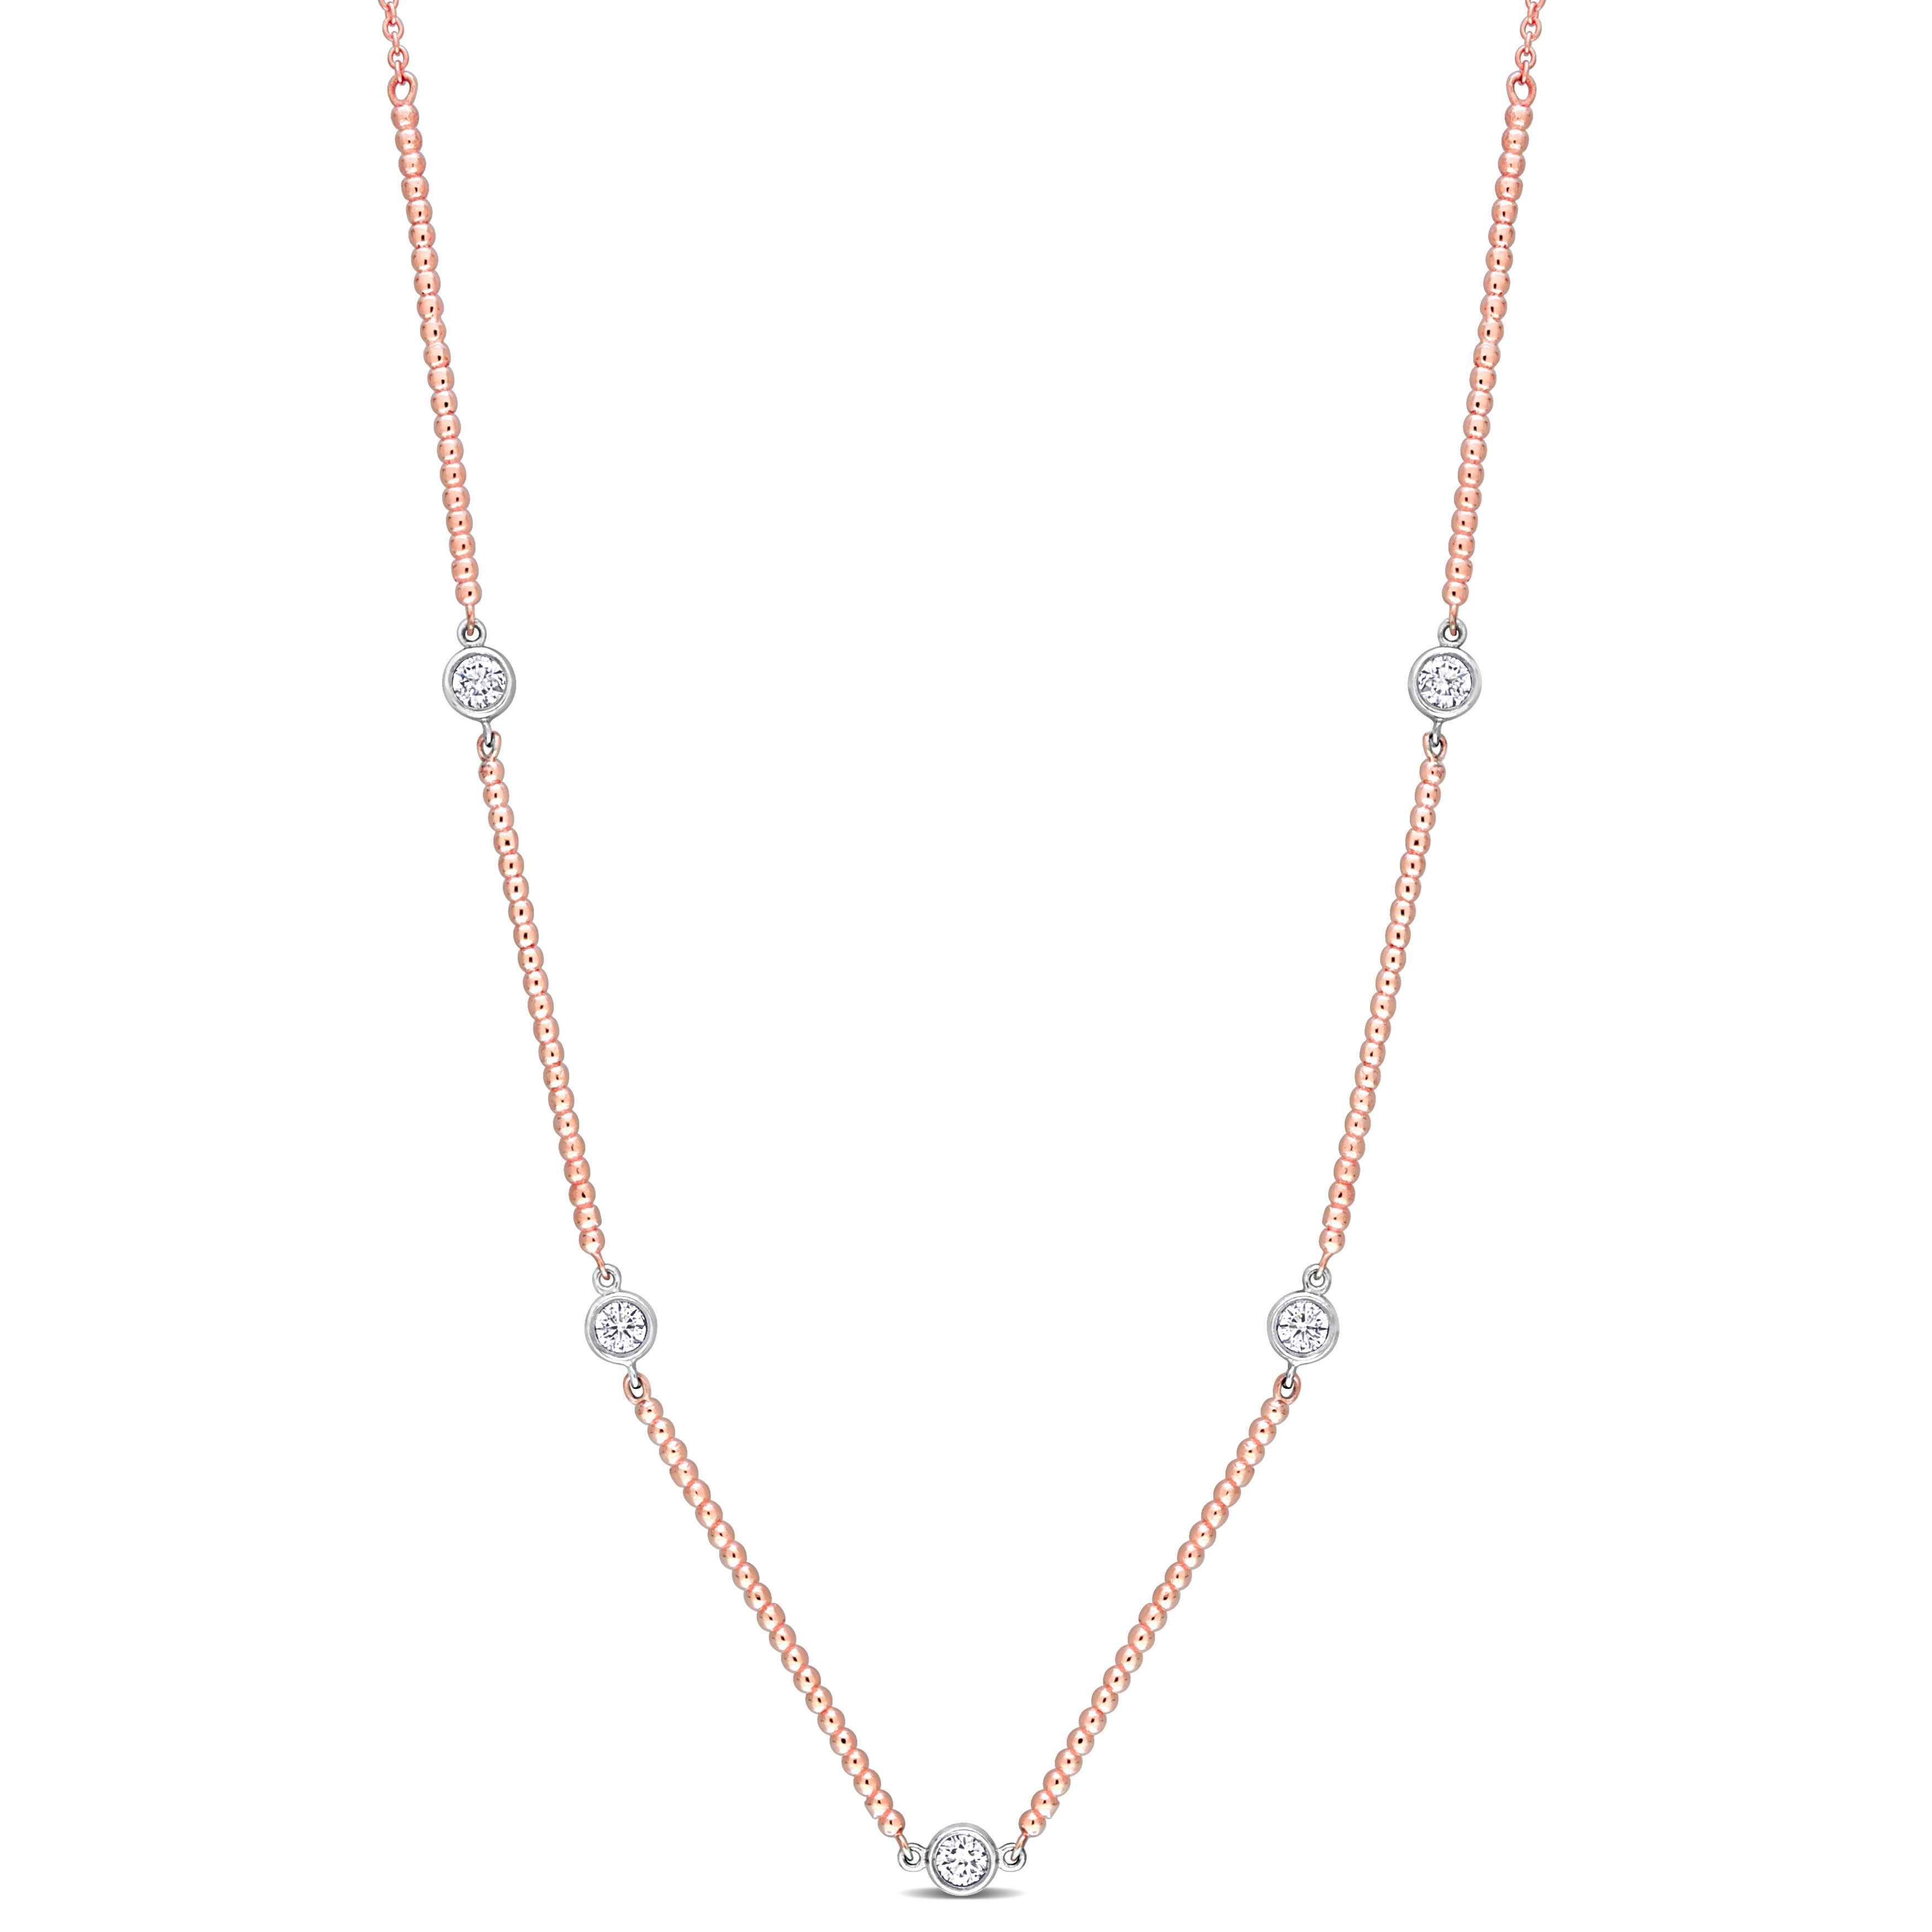 1/4 CT TDW Diamond Station Necklace in 14k Two-Tone White and Rose Gold - 17.5 in.